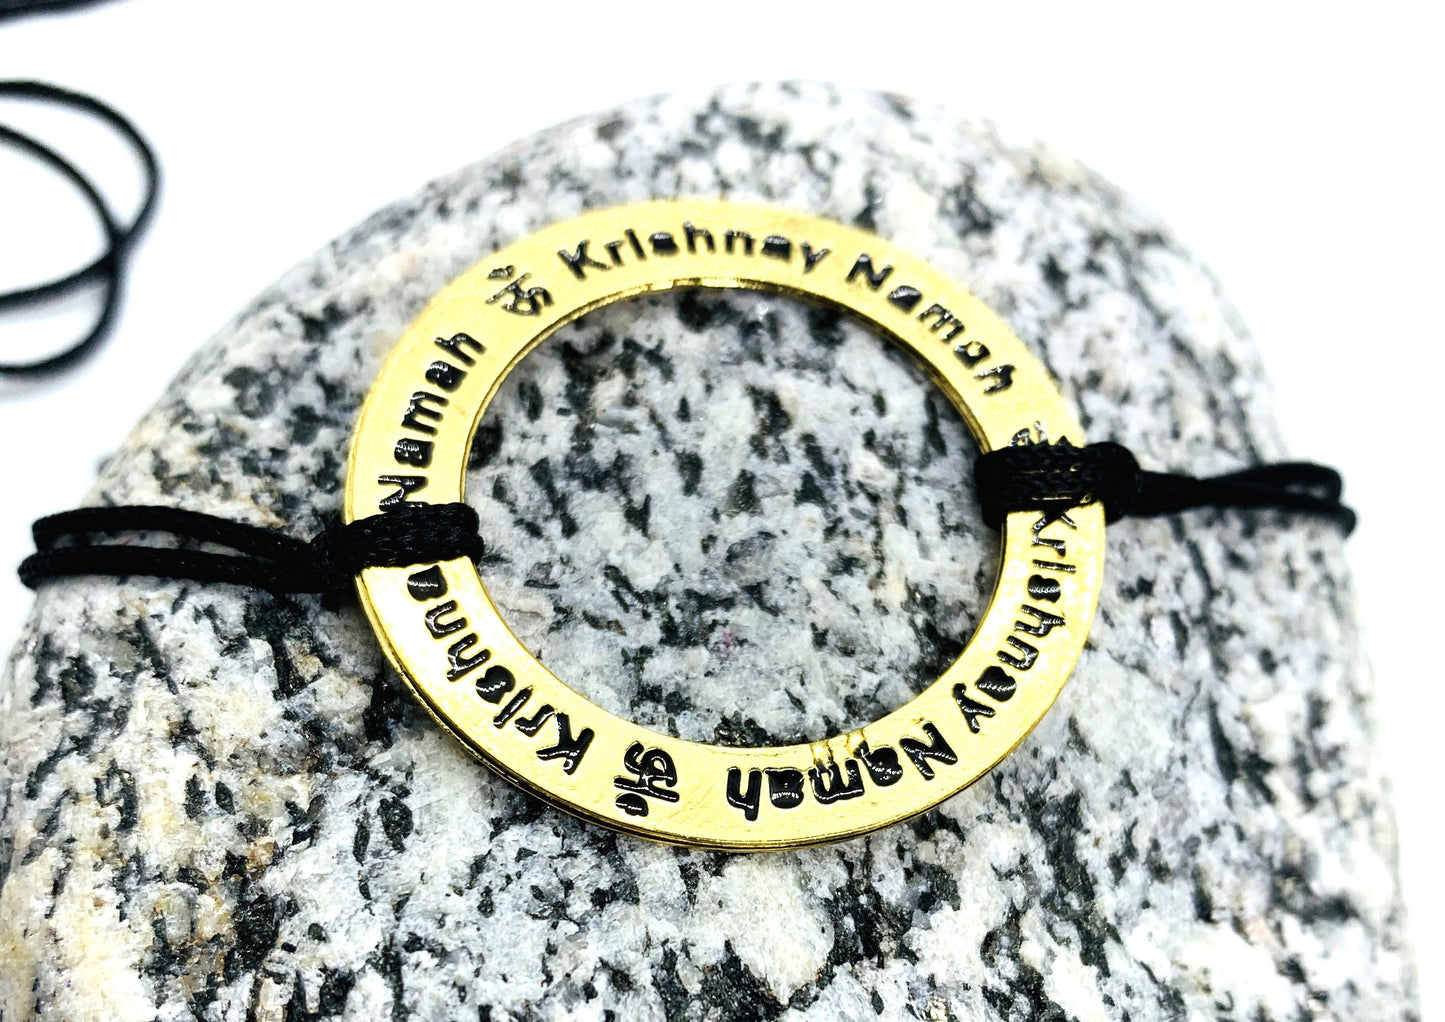 Corded Metallic bracelet - engraved - Hare Krishna Mantra in hindi Traditional hand crafted cuff bracelet gift for him her unique design